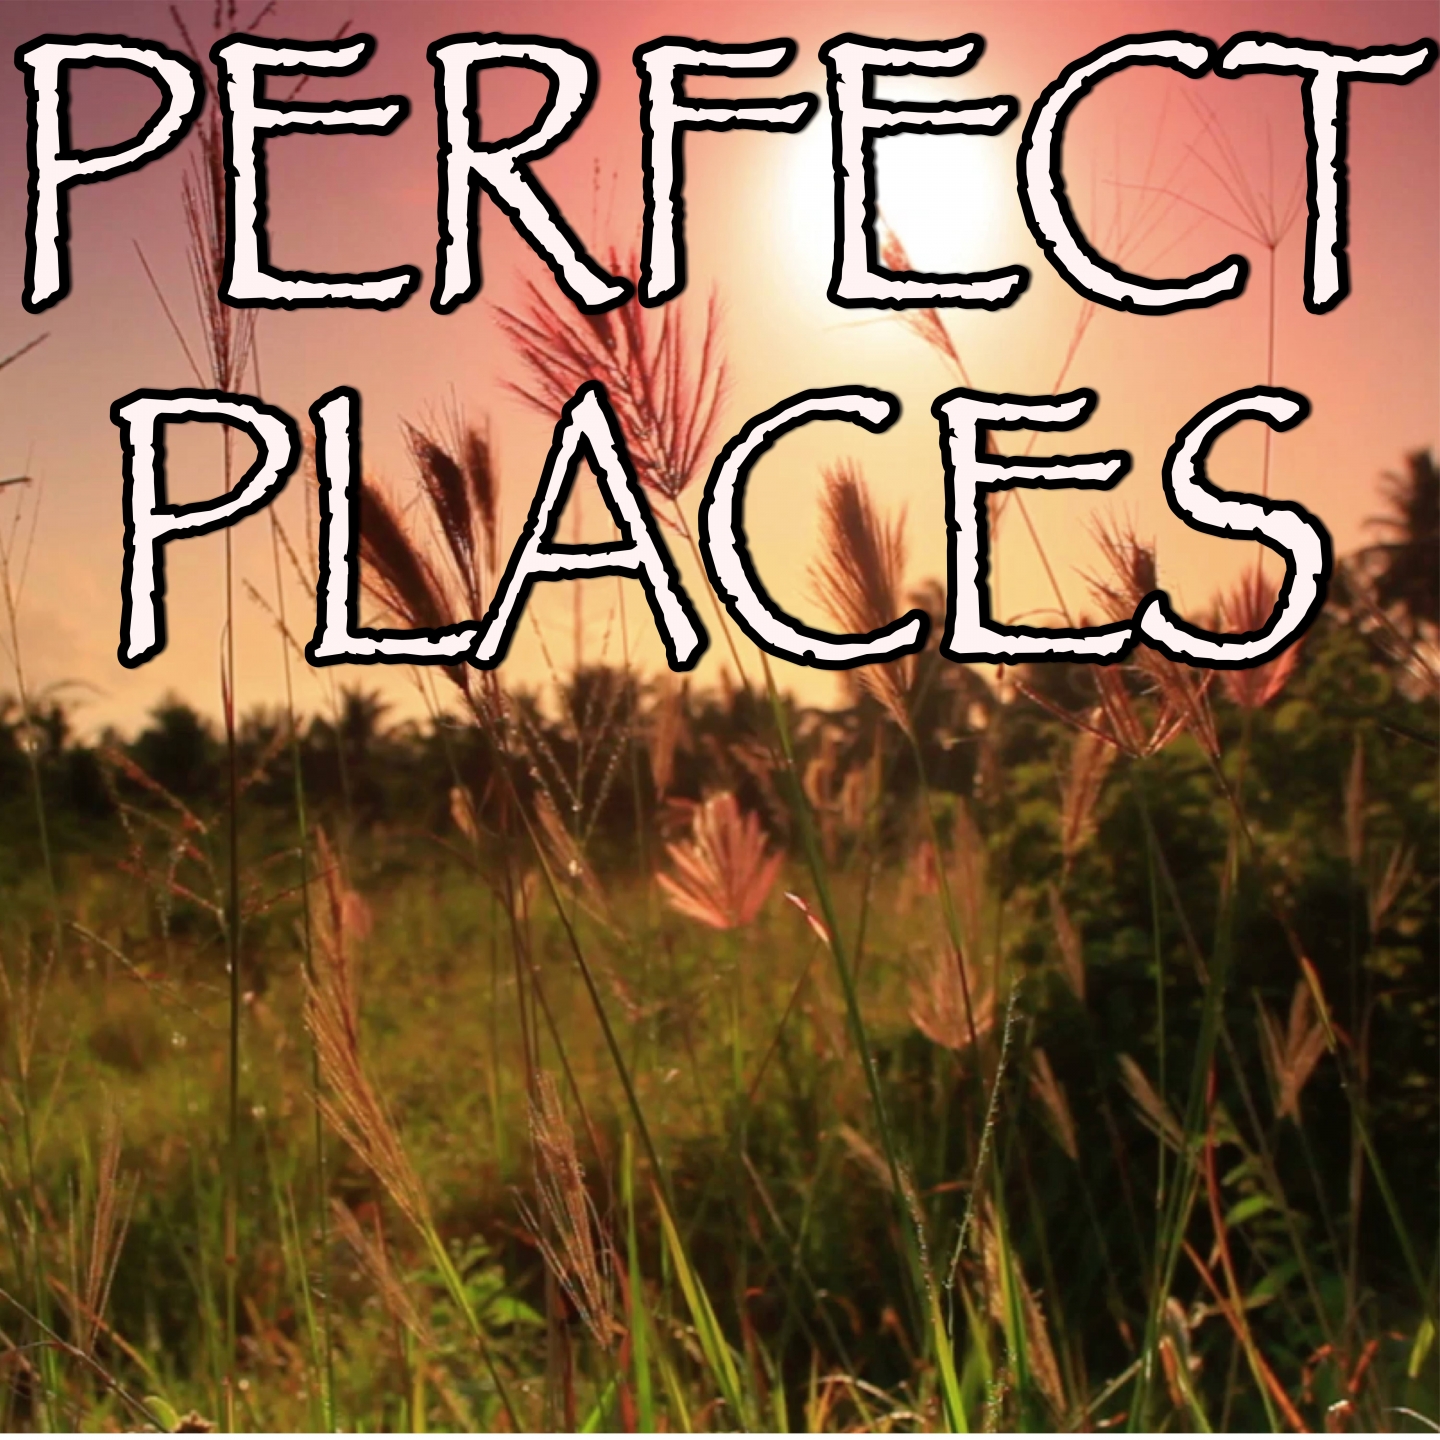 Perfect Places - Tribute to Lorde